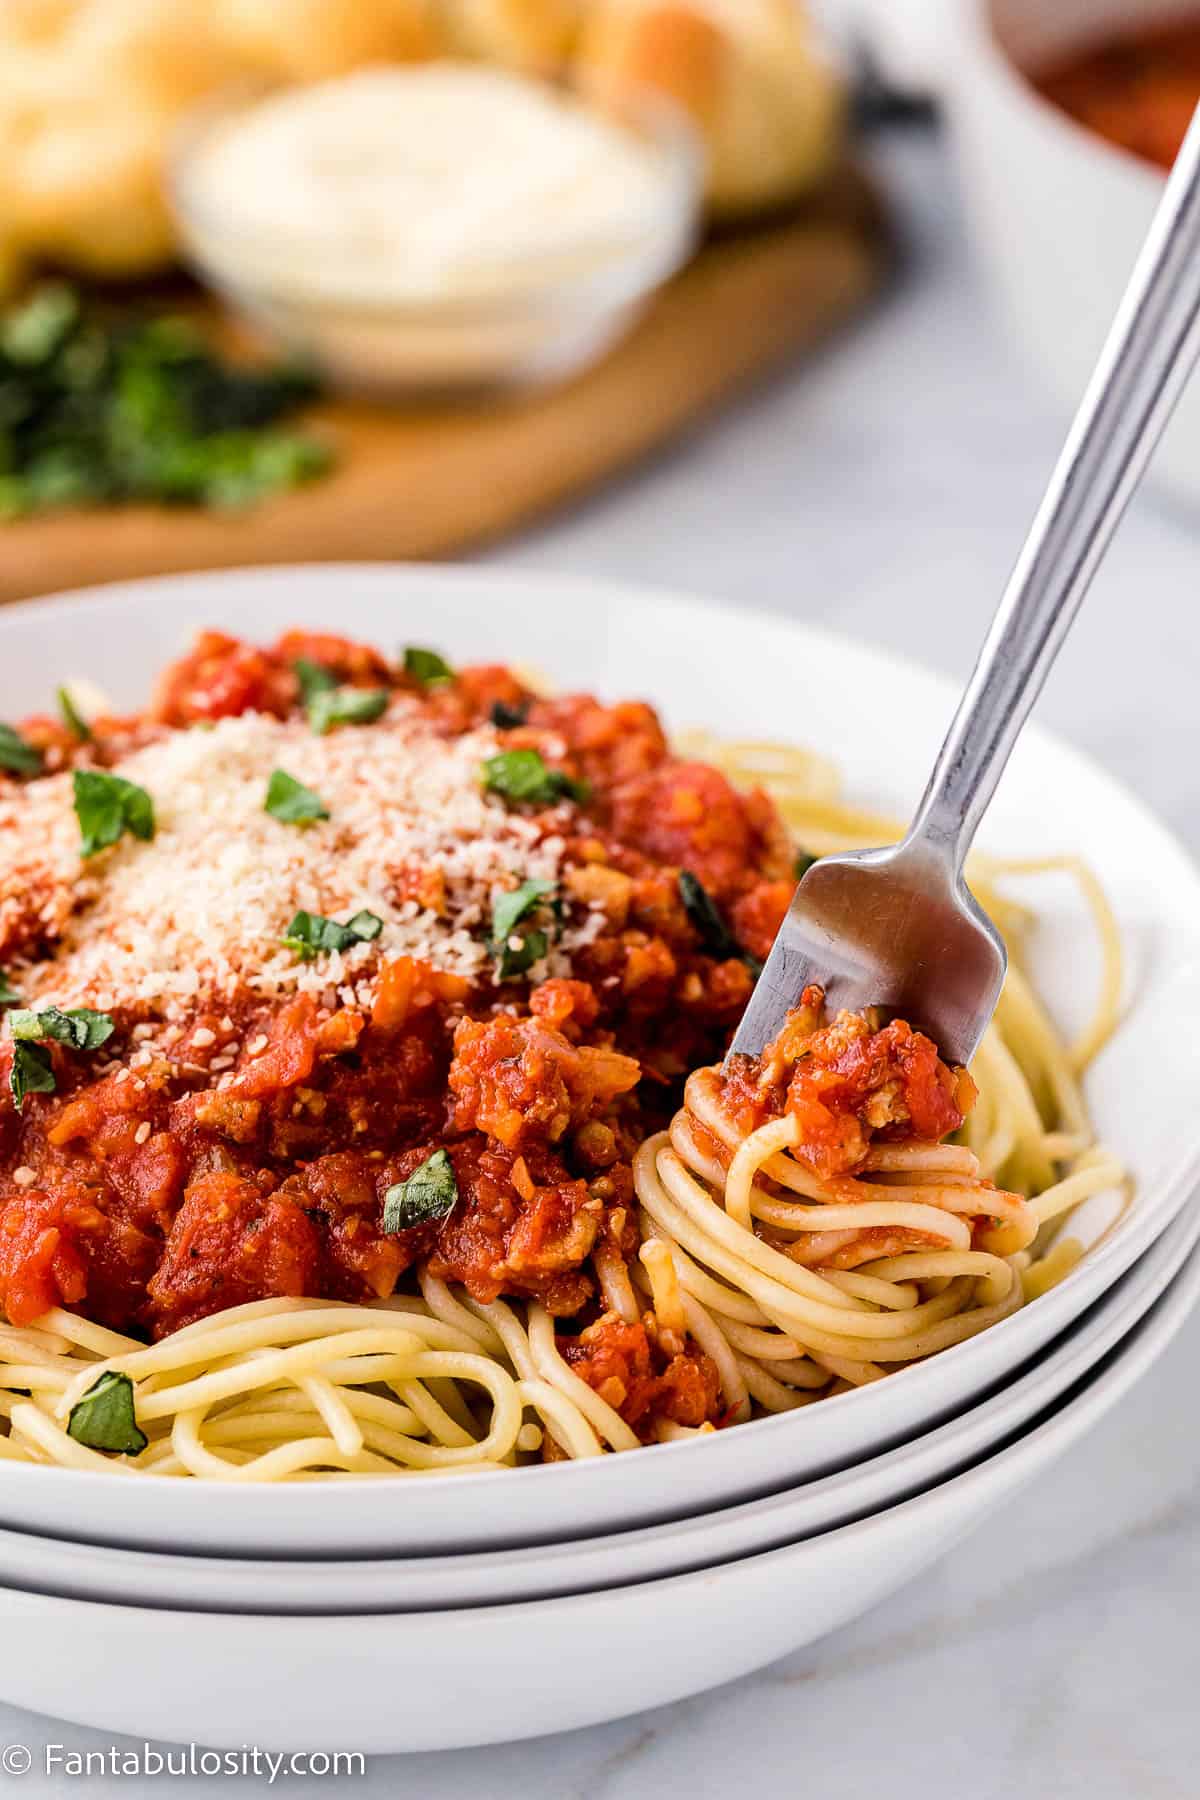 Chicken bolognese sauce on top of spaghetti noodles, with fork taking a bite.